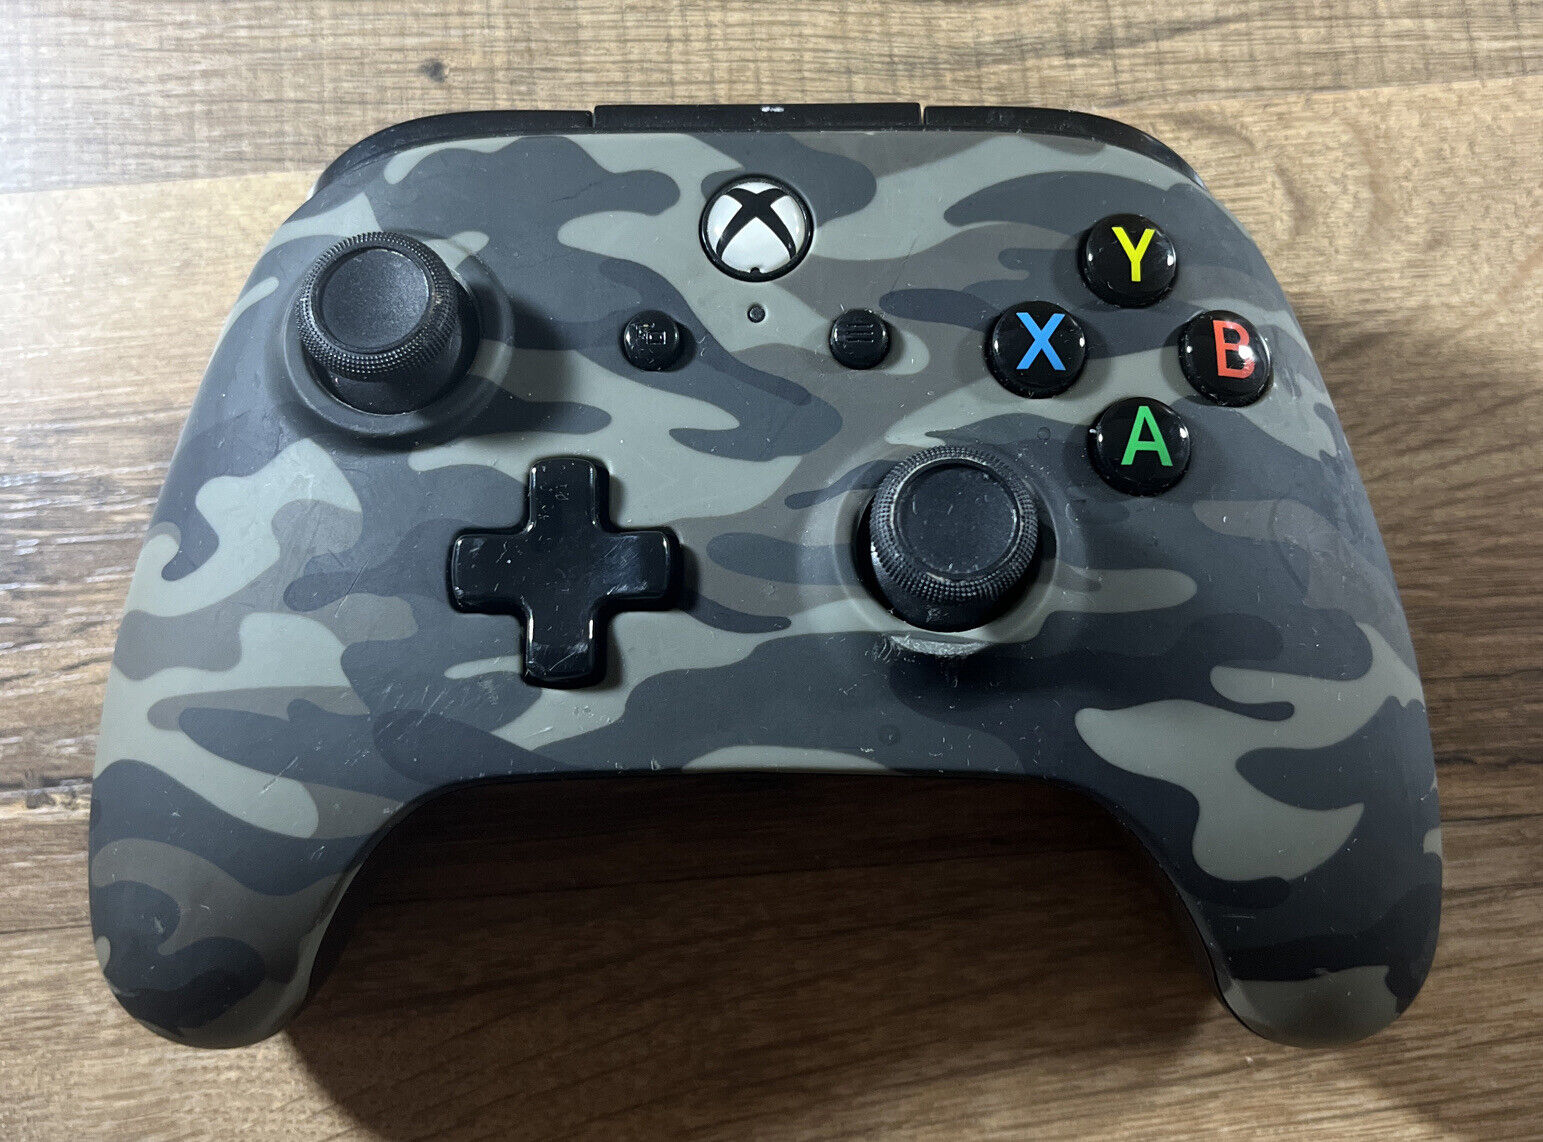 Are These Fake or Genuine Xbox Series & Xbox One Controllers? And are They a Worthy Upgrades? [​IMG]